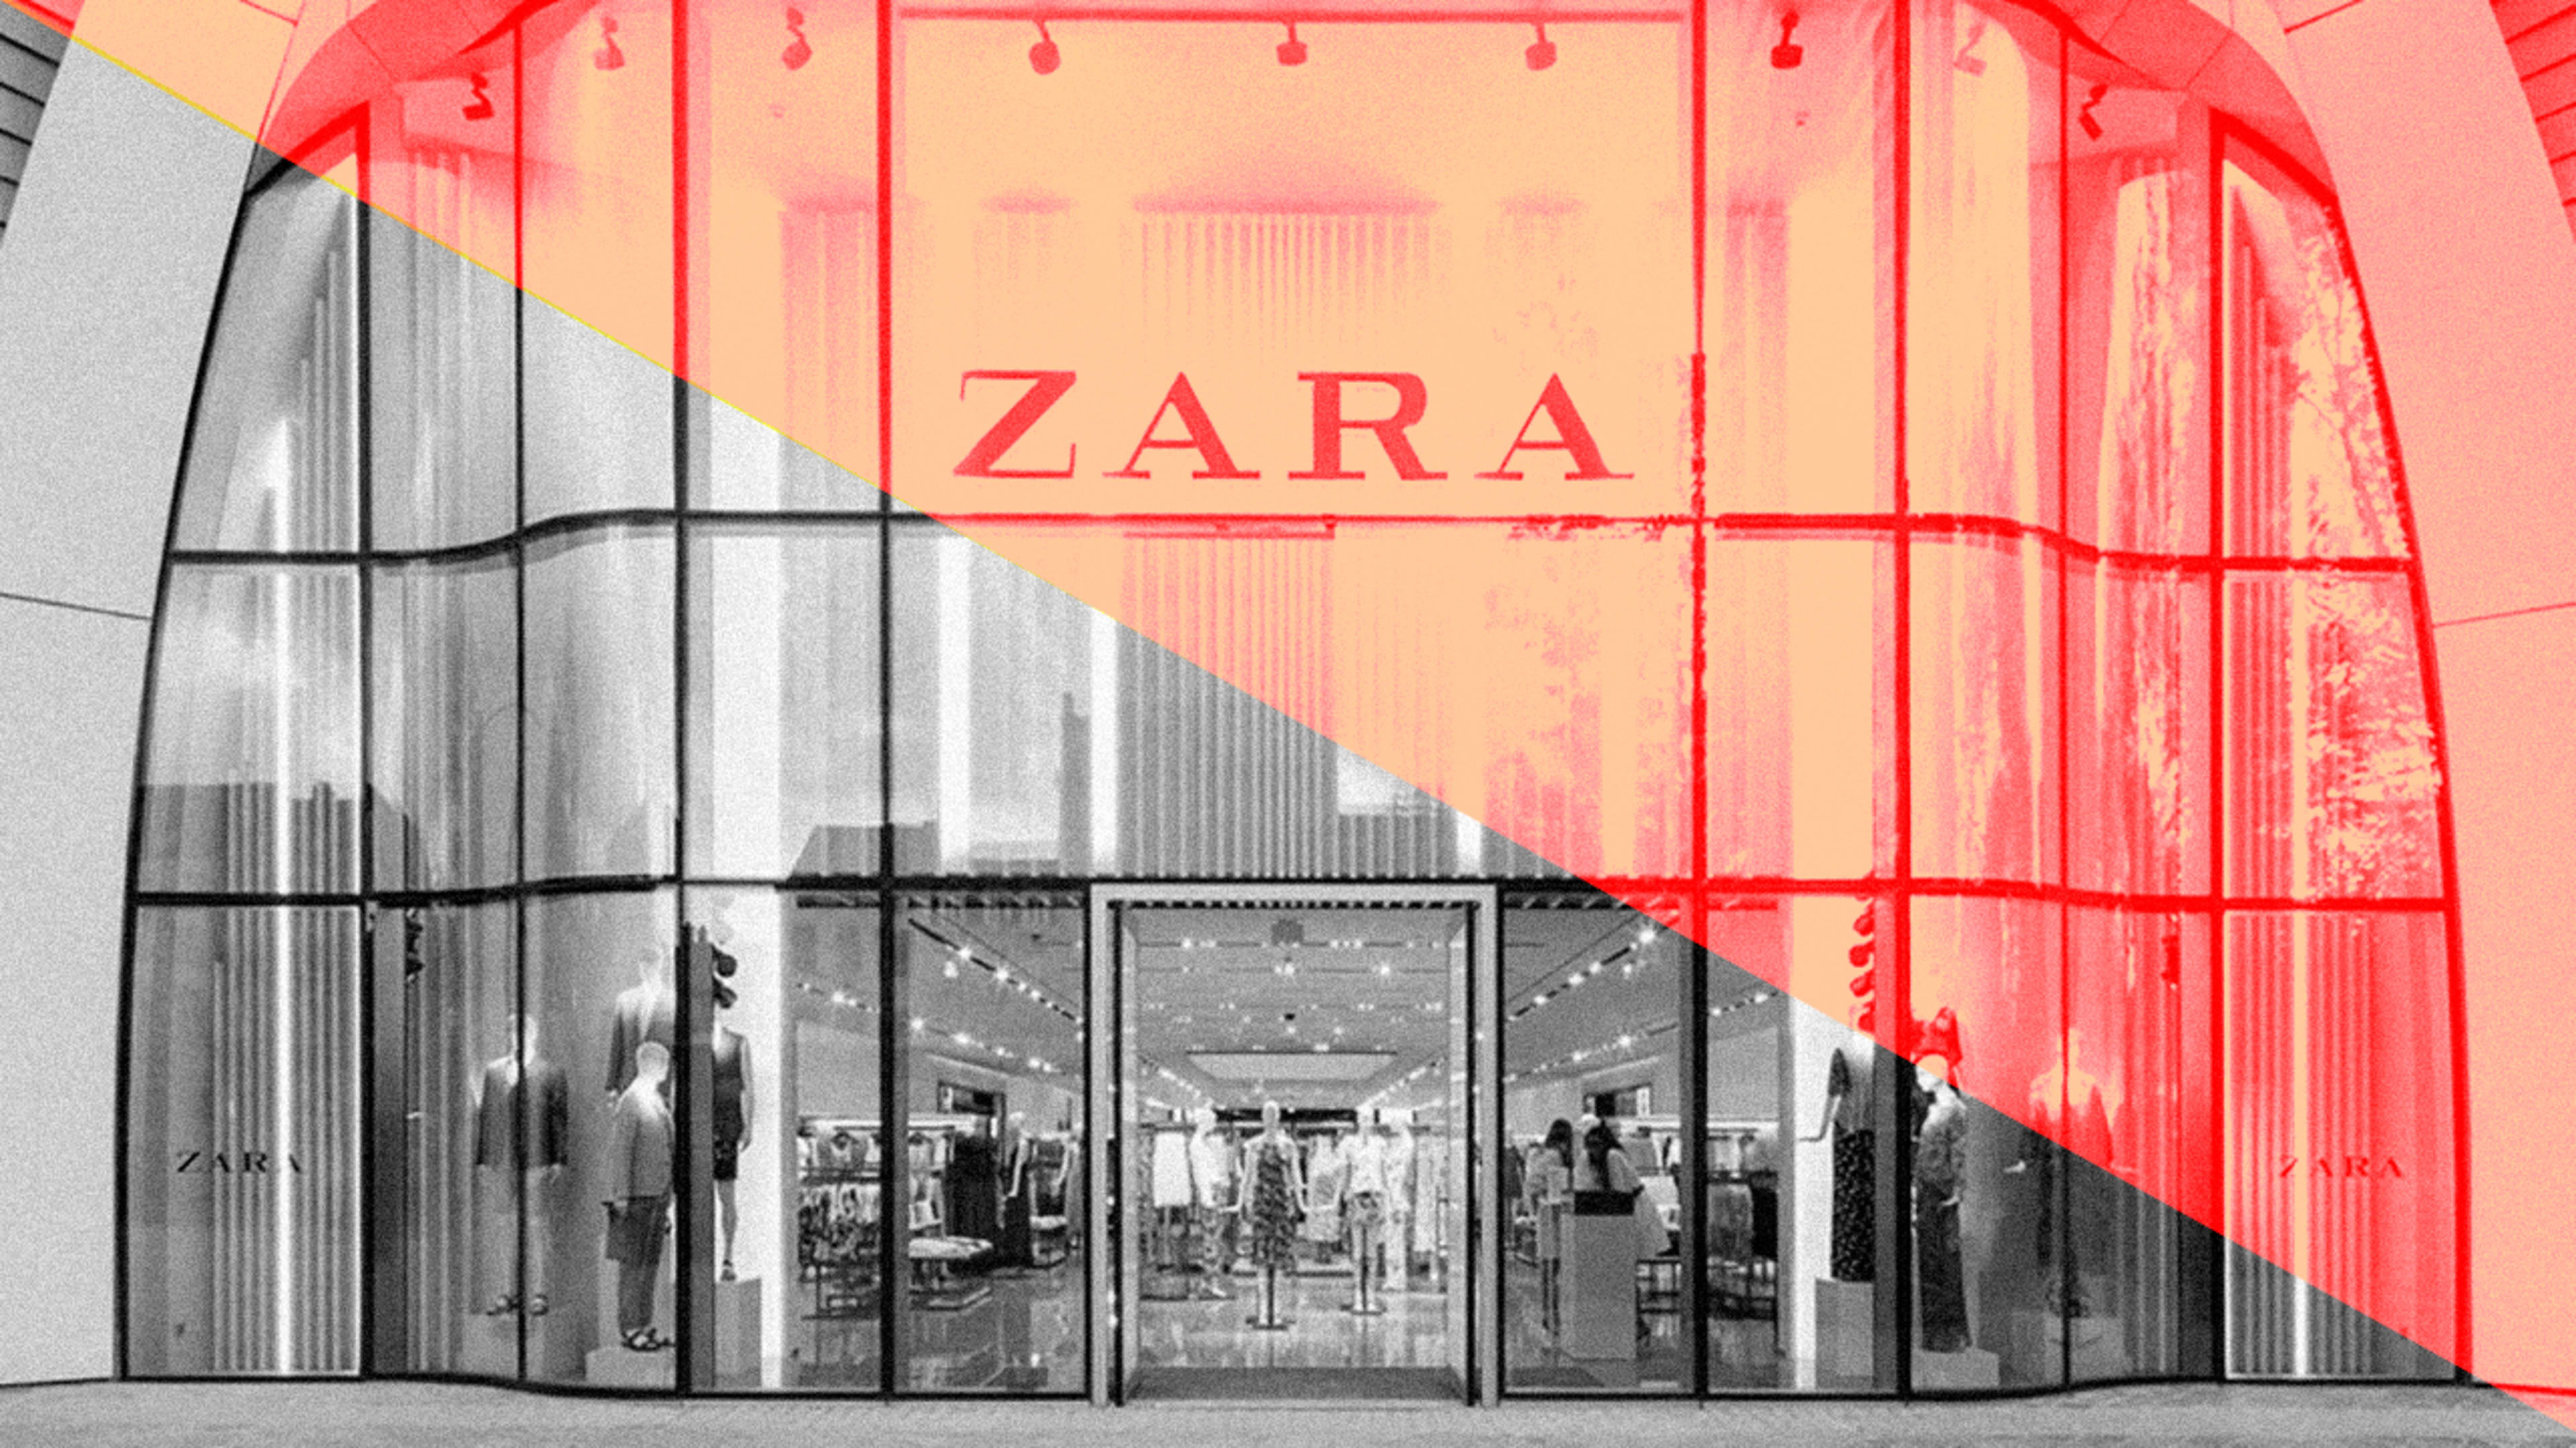 Yes, even Zara is closing stores: Here’s a list of the latest retail apocalypse mall victims